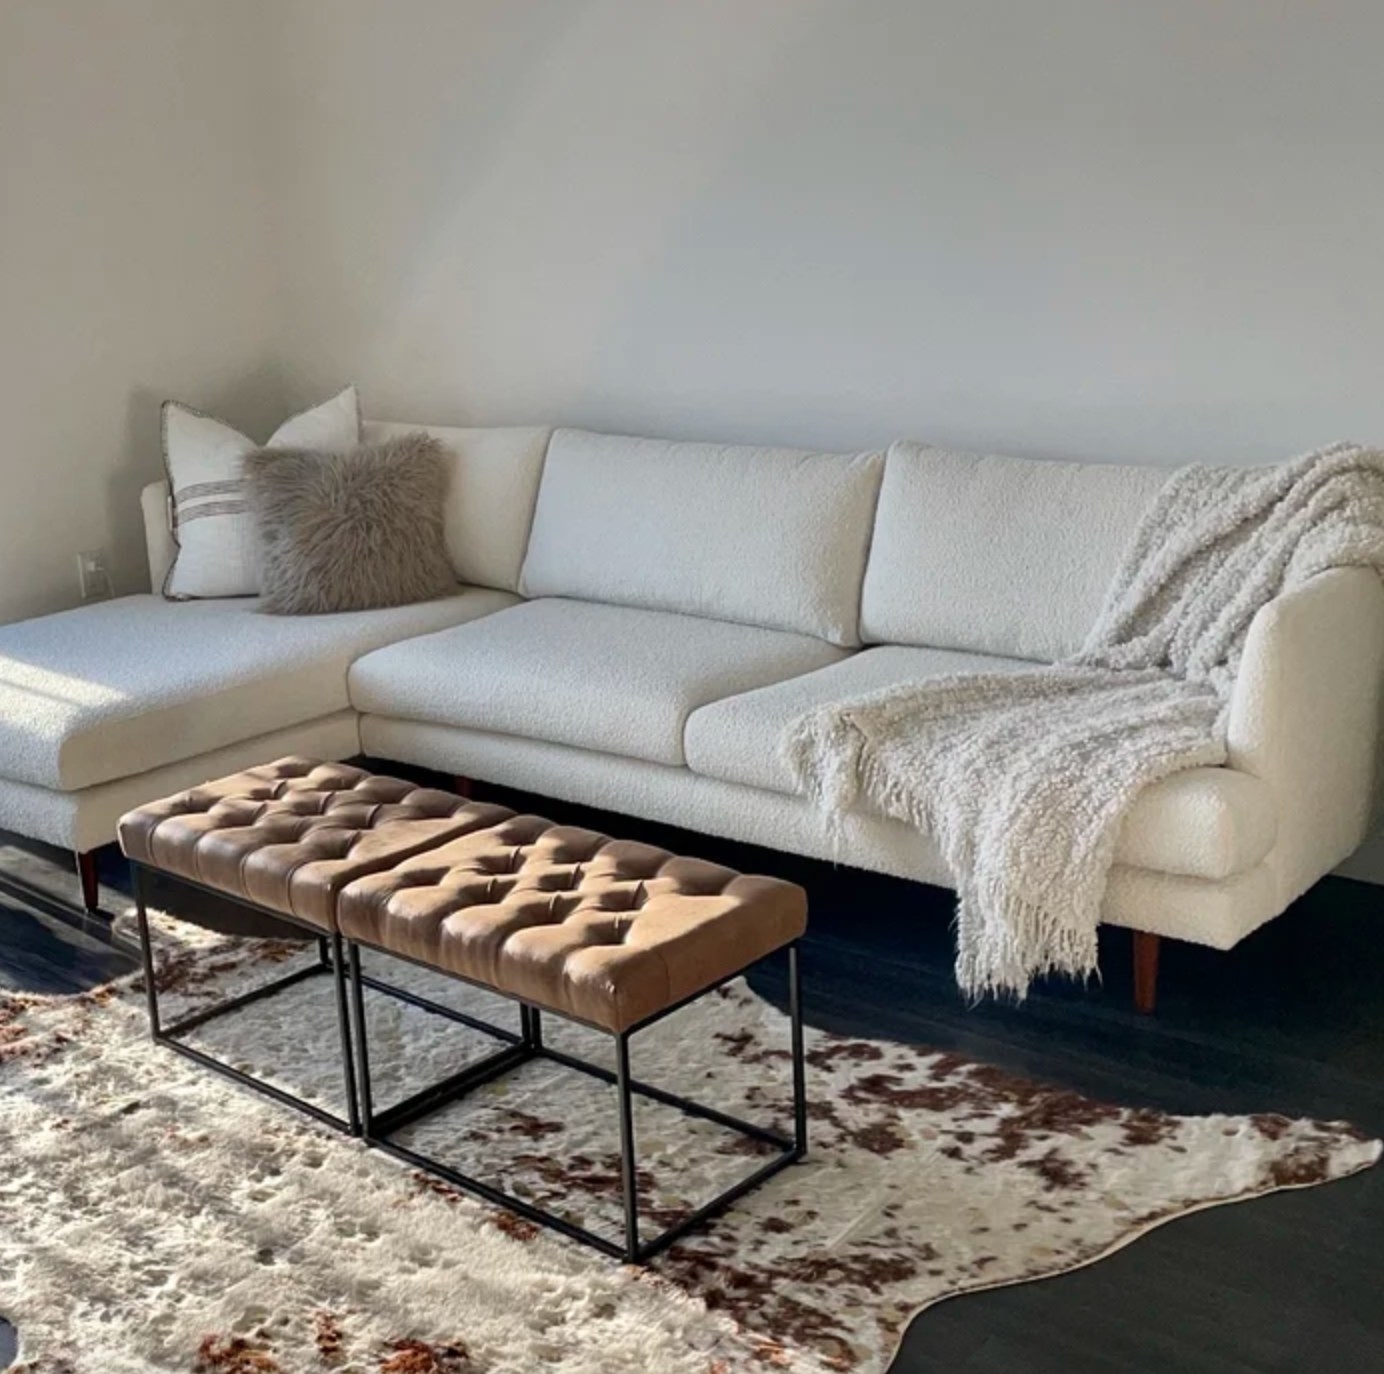 Reviewer photo: The wide and low sectional sofa